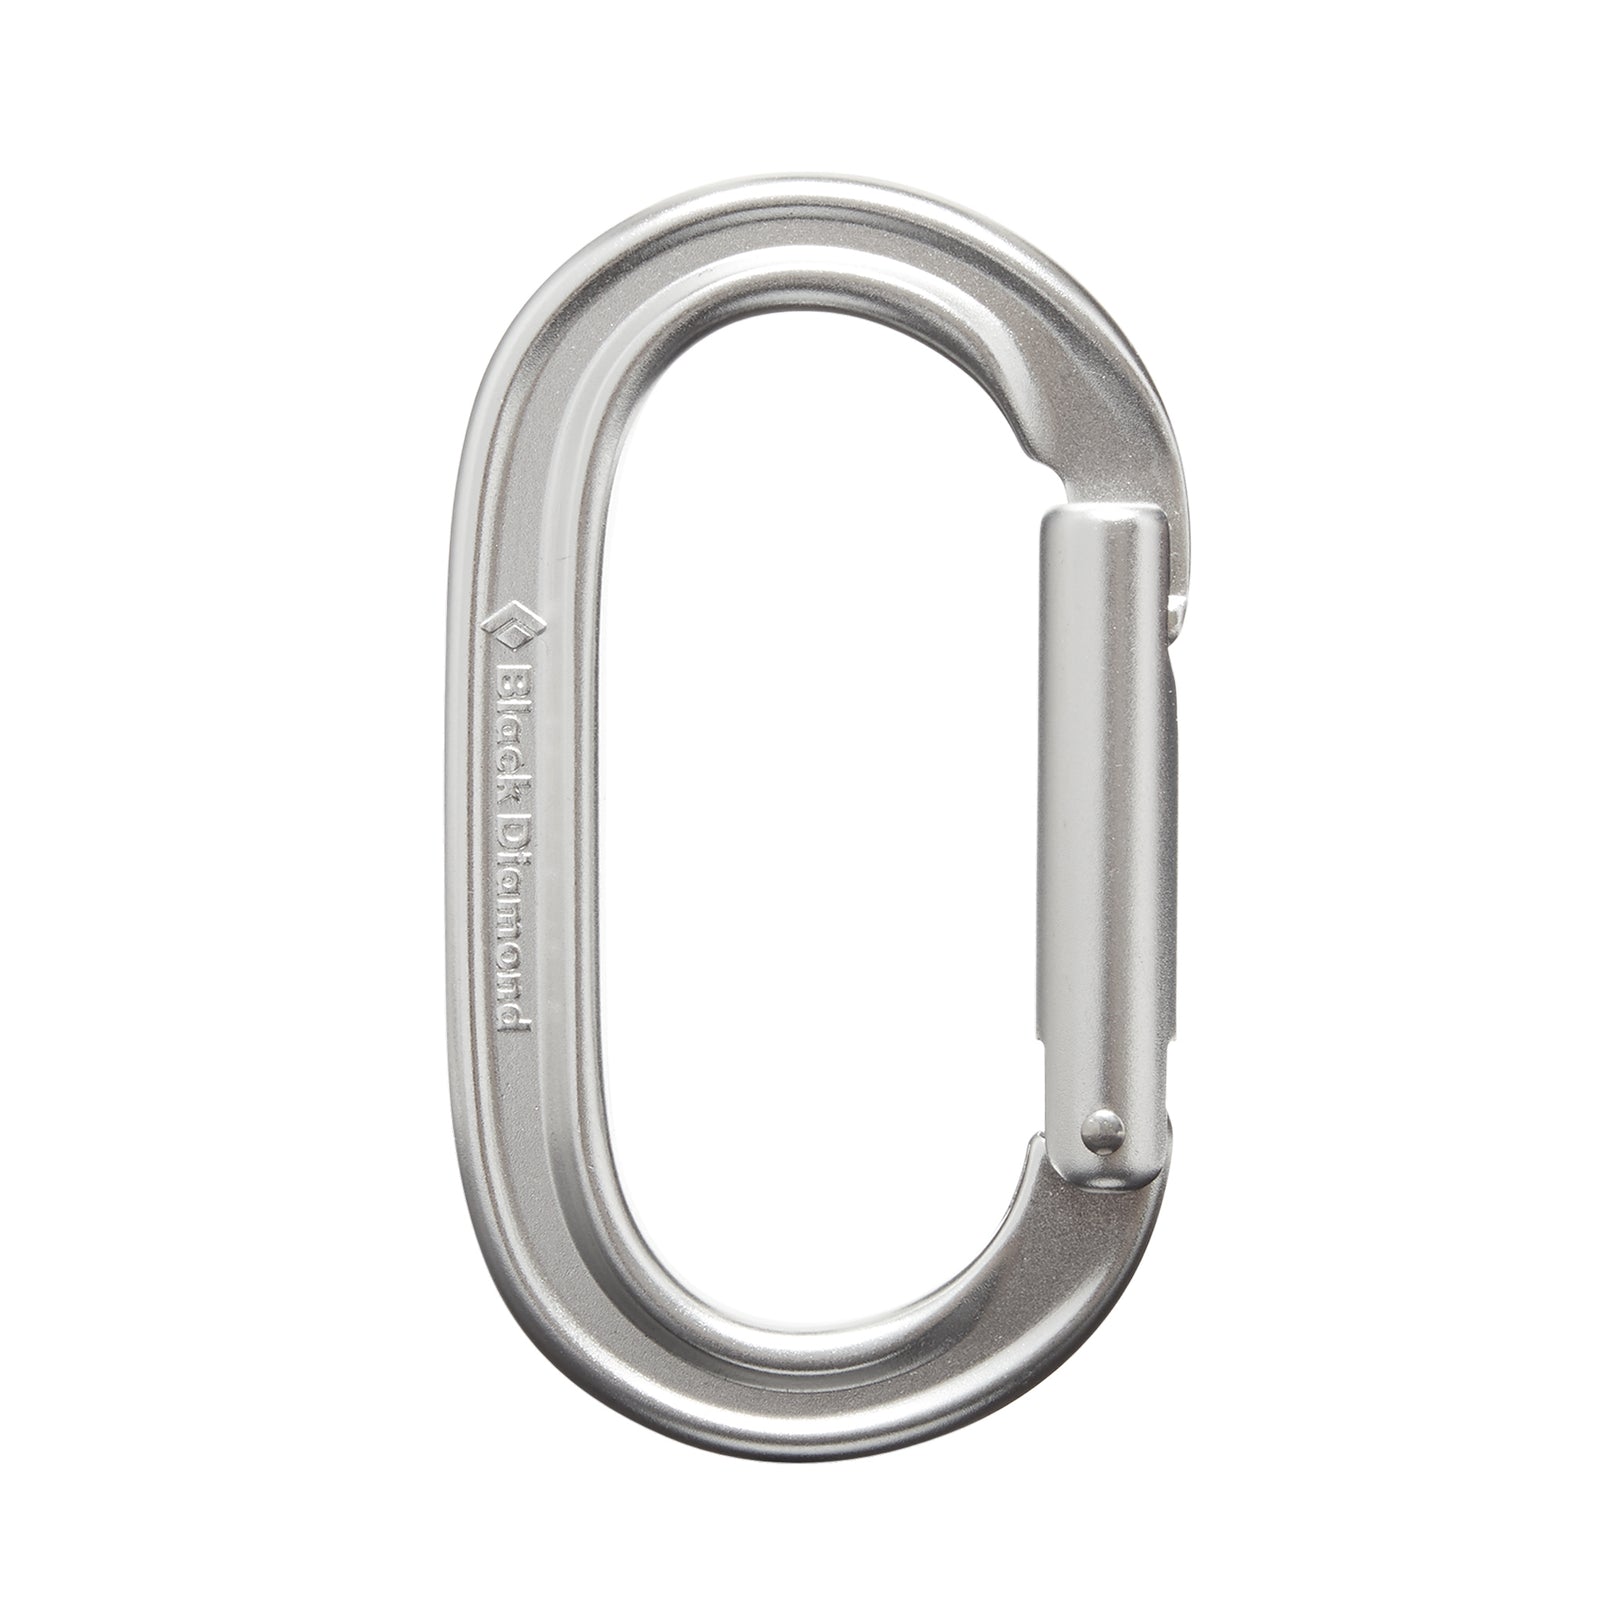 a silver oval carabiner